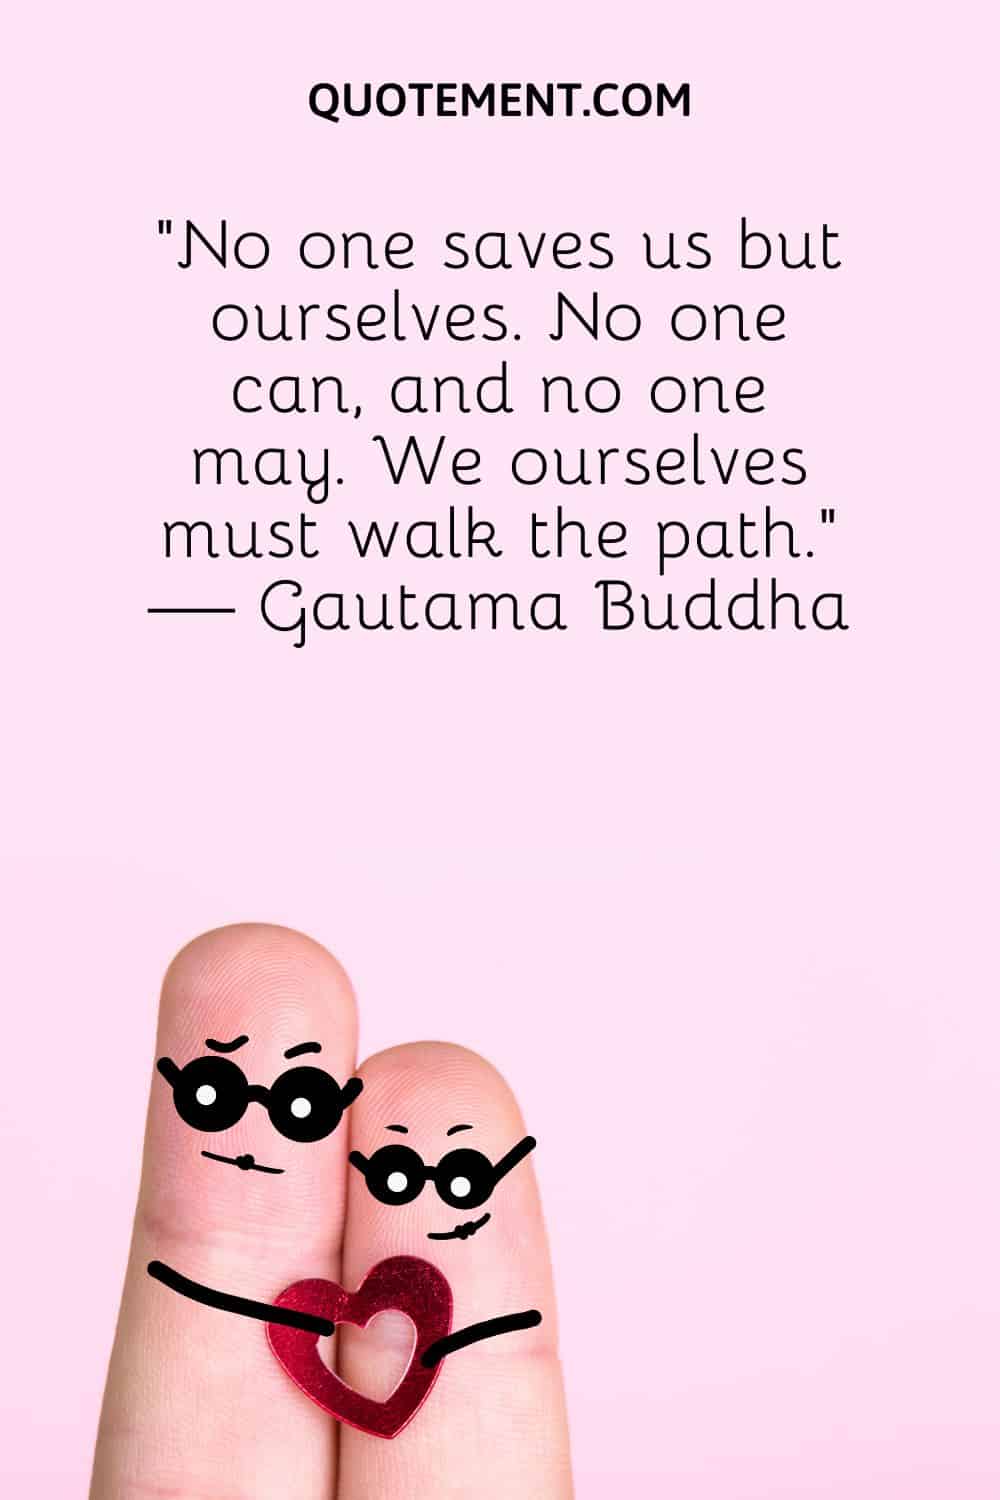 ”No one saves us but ourselves. No one can, and no one may. We ourselves must walk the path.” — Gautama Buddha